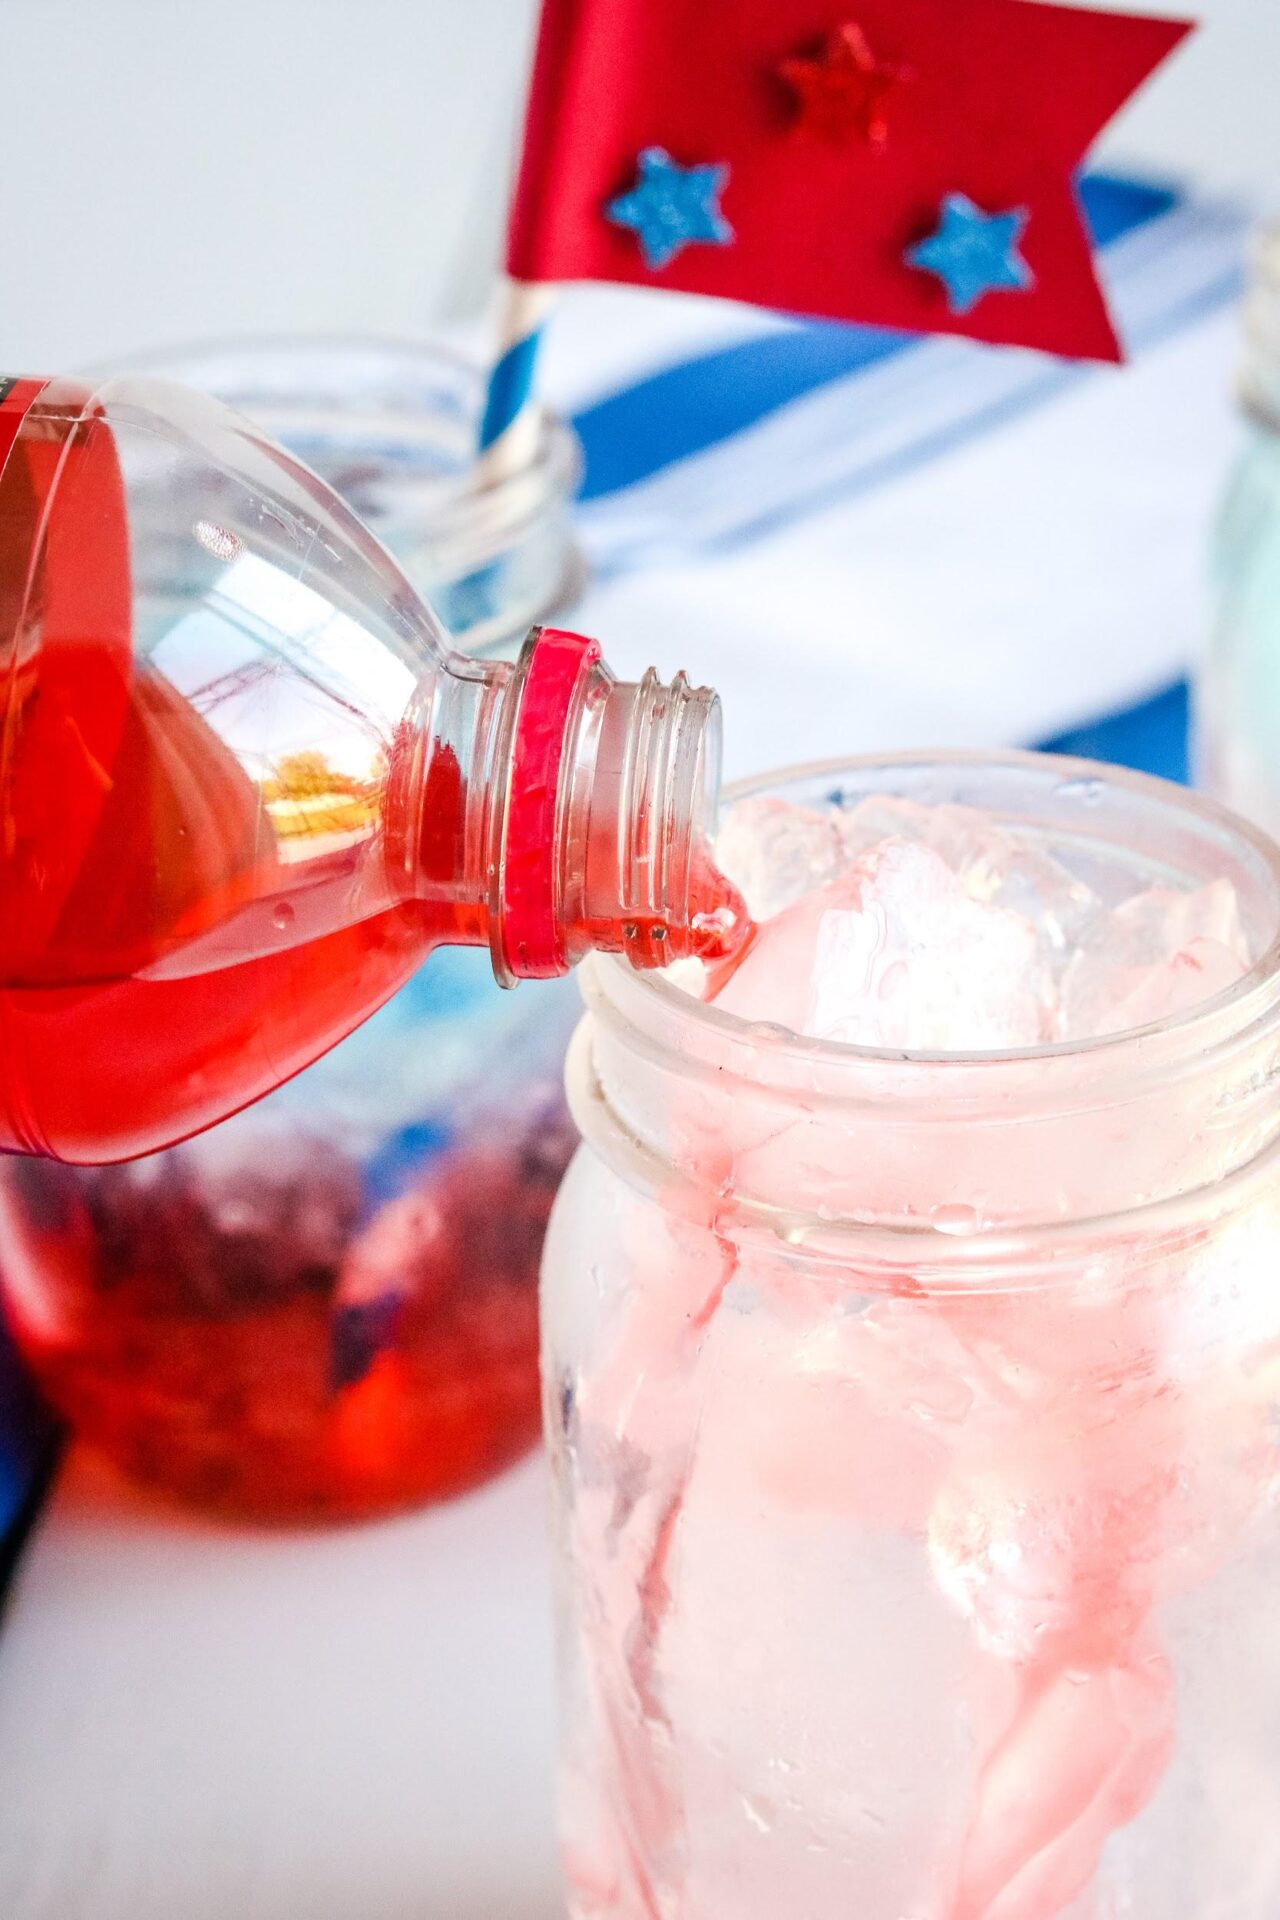 Looking for a kid-friendly fourth of July drink? Meet the 4th of July Layered Sparkling drink!! Plus check out the 4th of July Craft Straws to make as well!